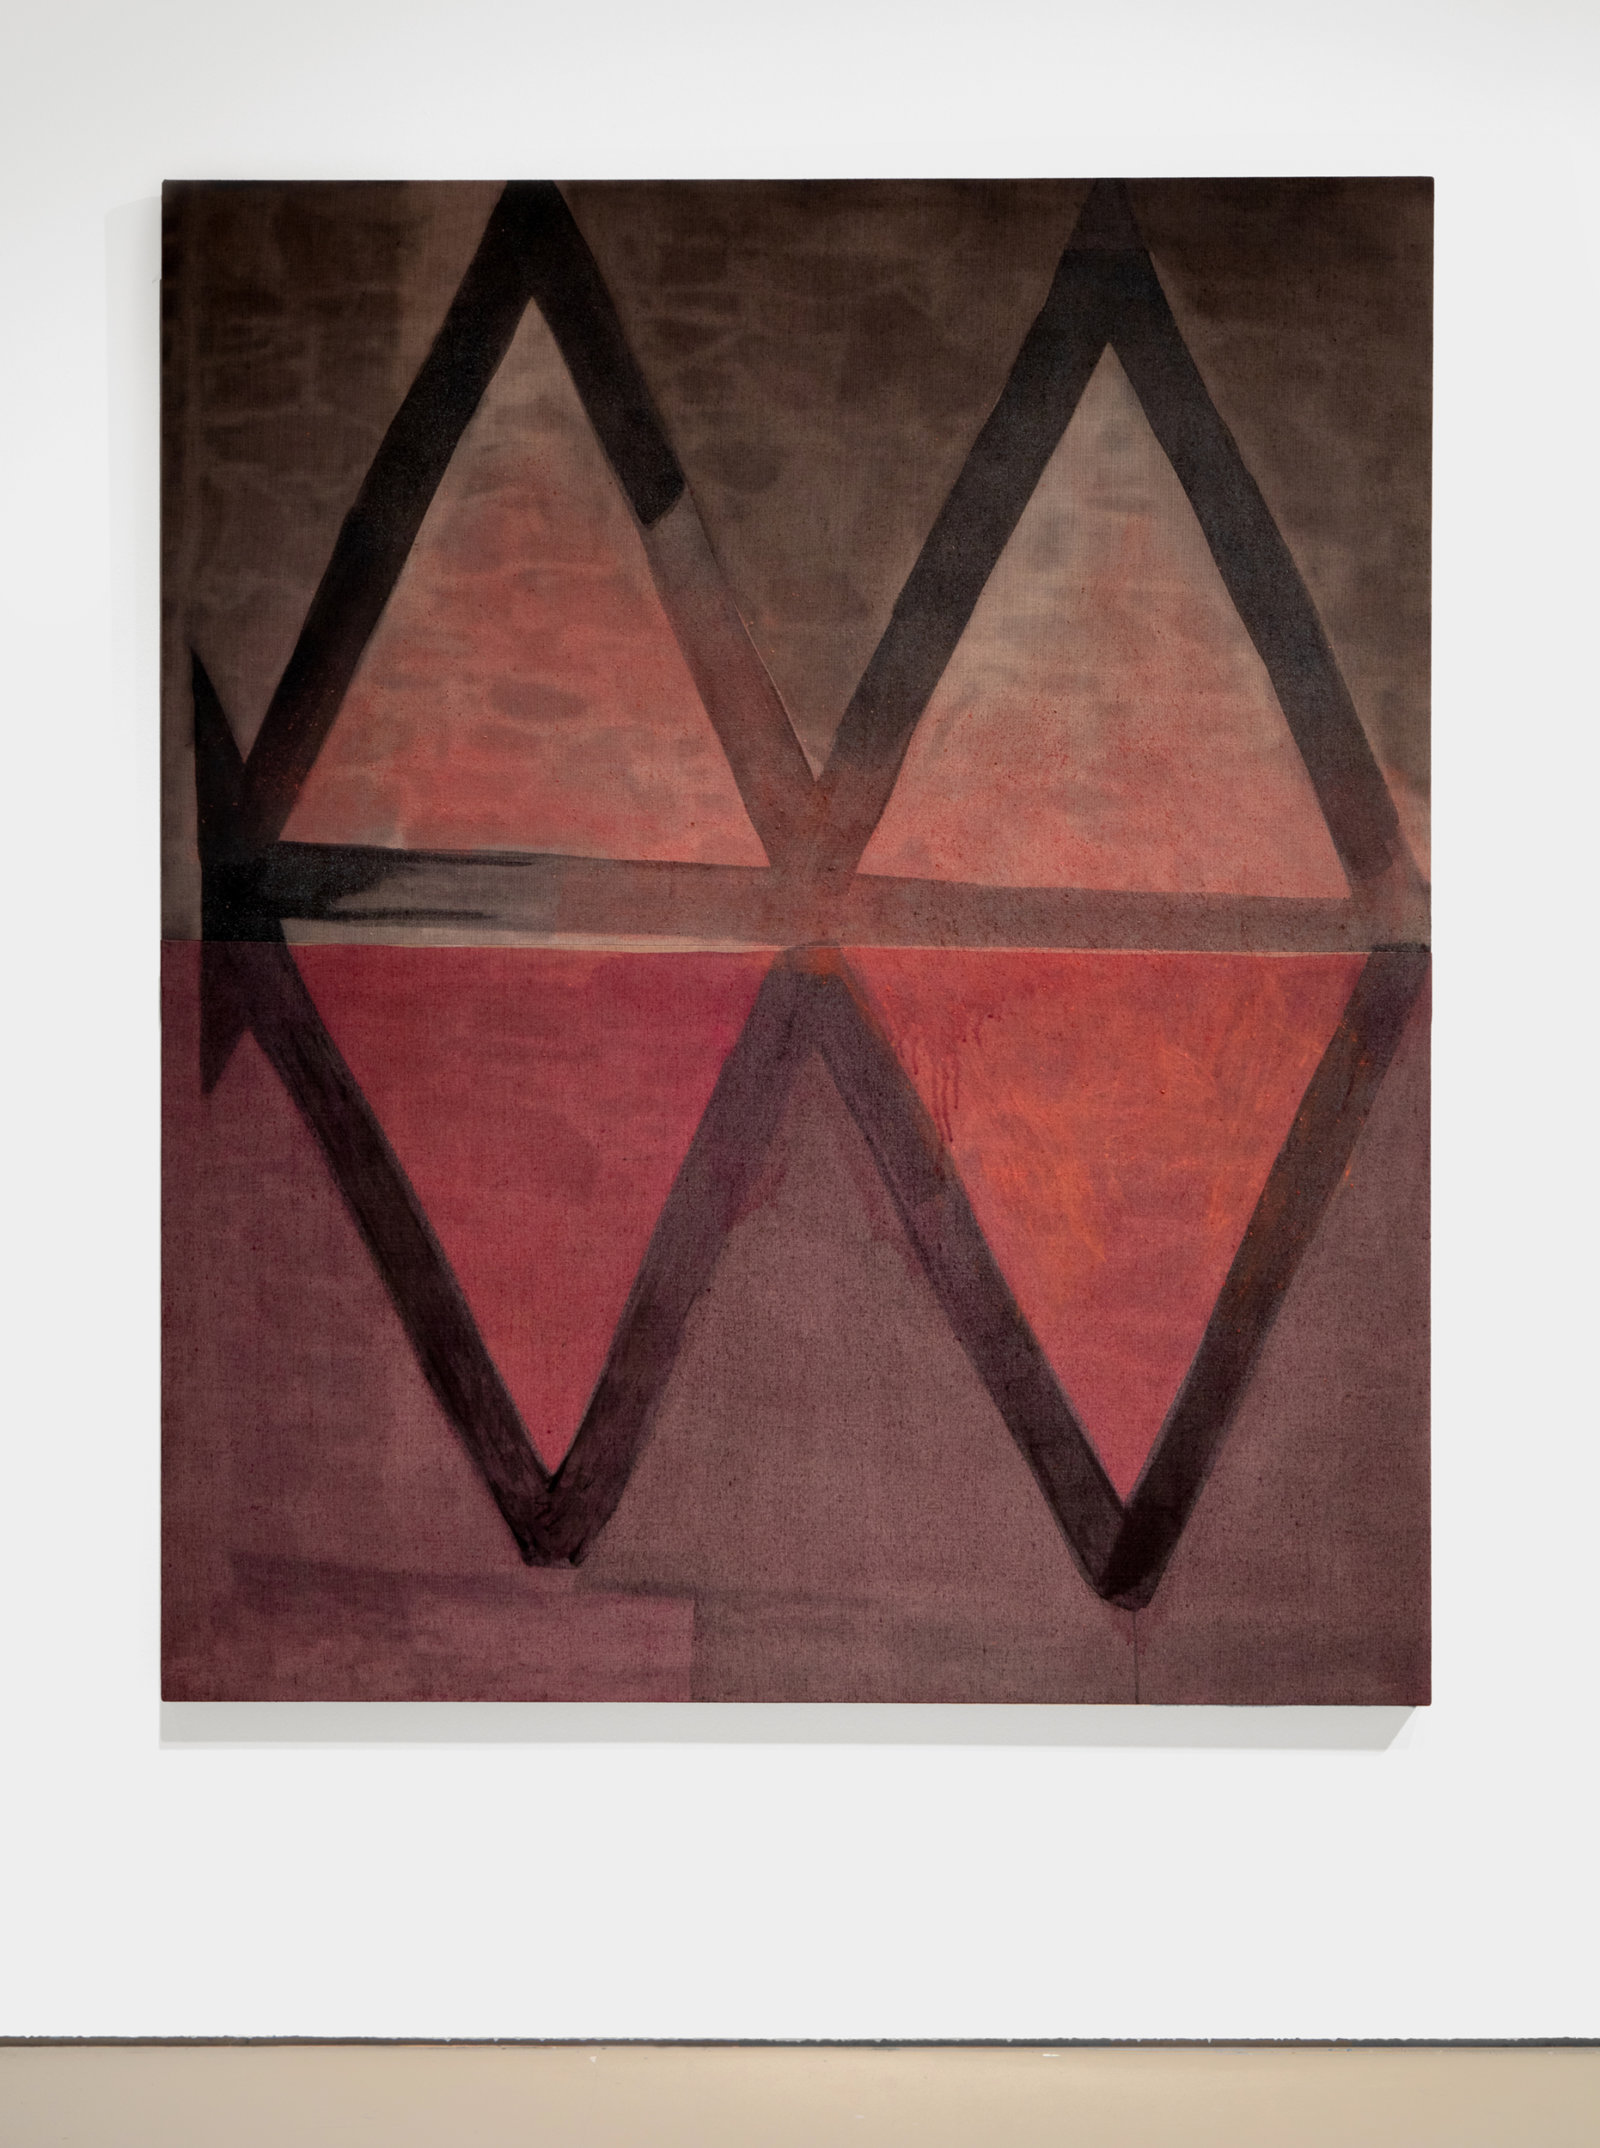 Duane Linklater, they have piled the stone / as they promised / without syrup 8, 2023, digital print on linen, cochineal, sumac, charcoal, 72 x 60 in. (183 x 152 cm)